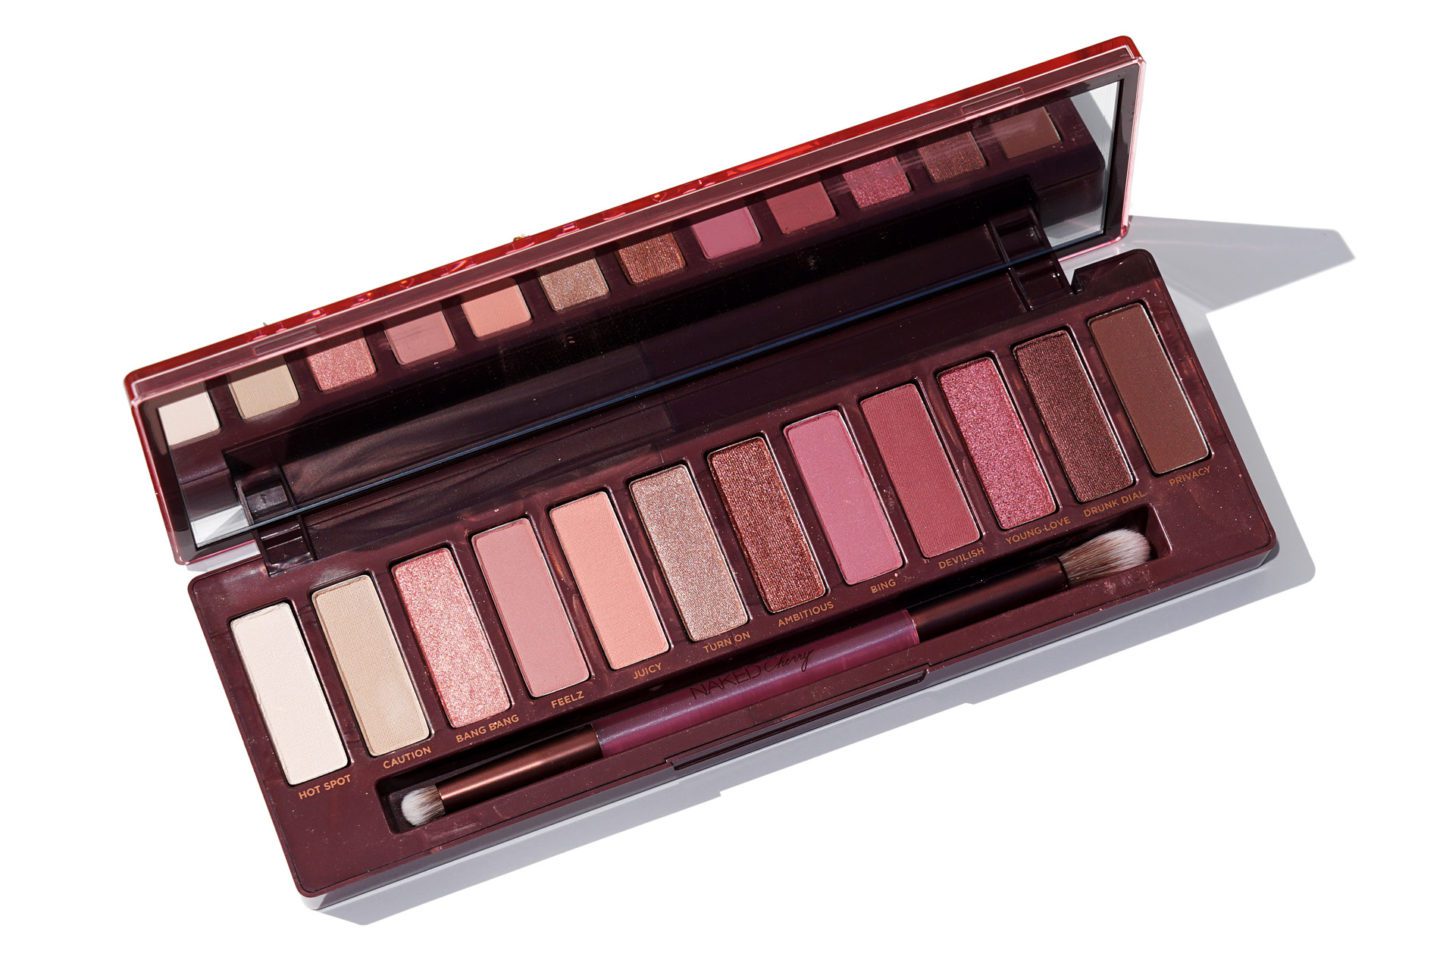 Urban Decay Naked Cherry Eyeshadow Palette Review | The Beauty Look Book